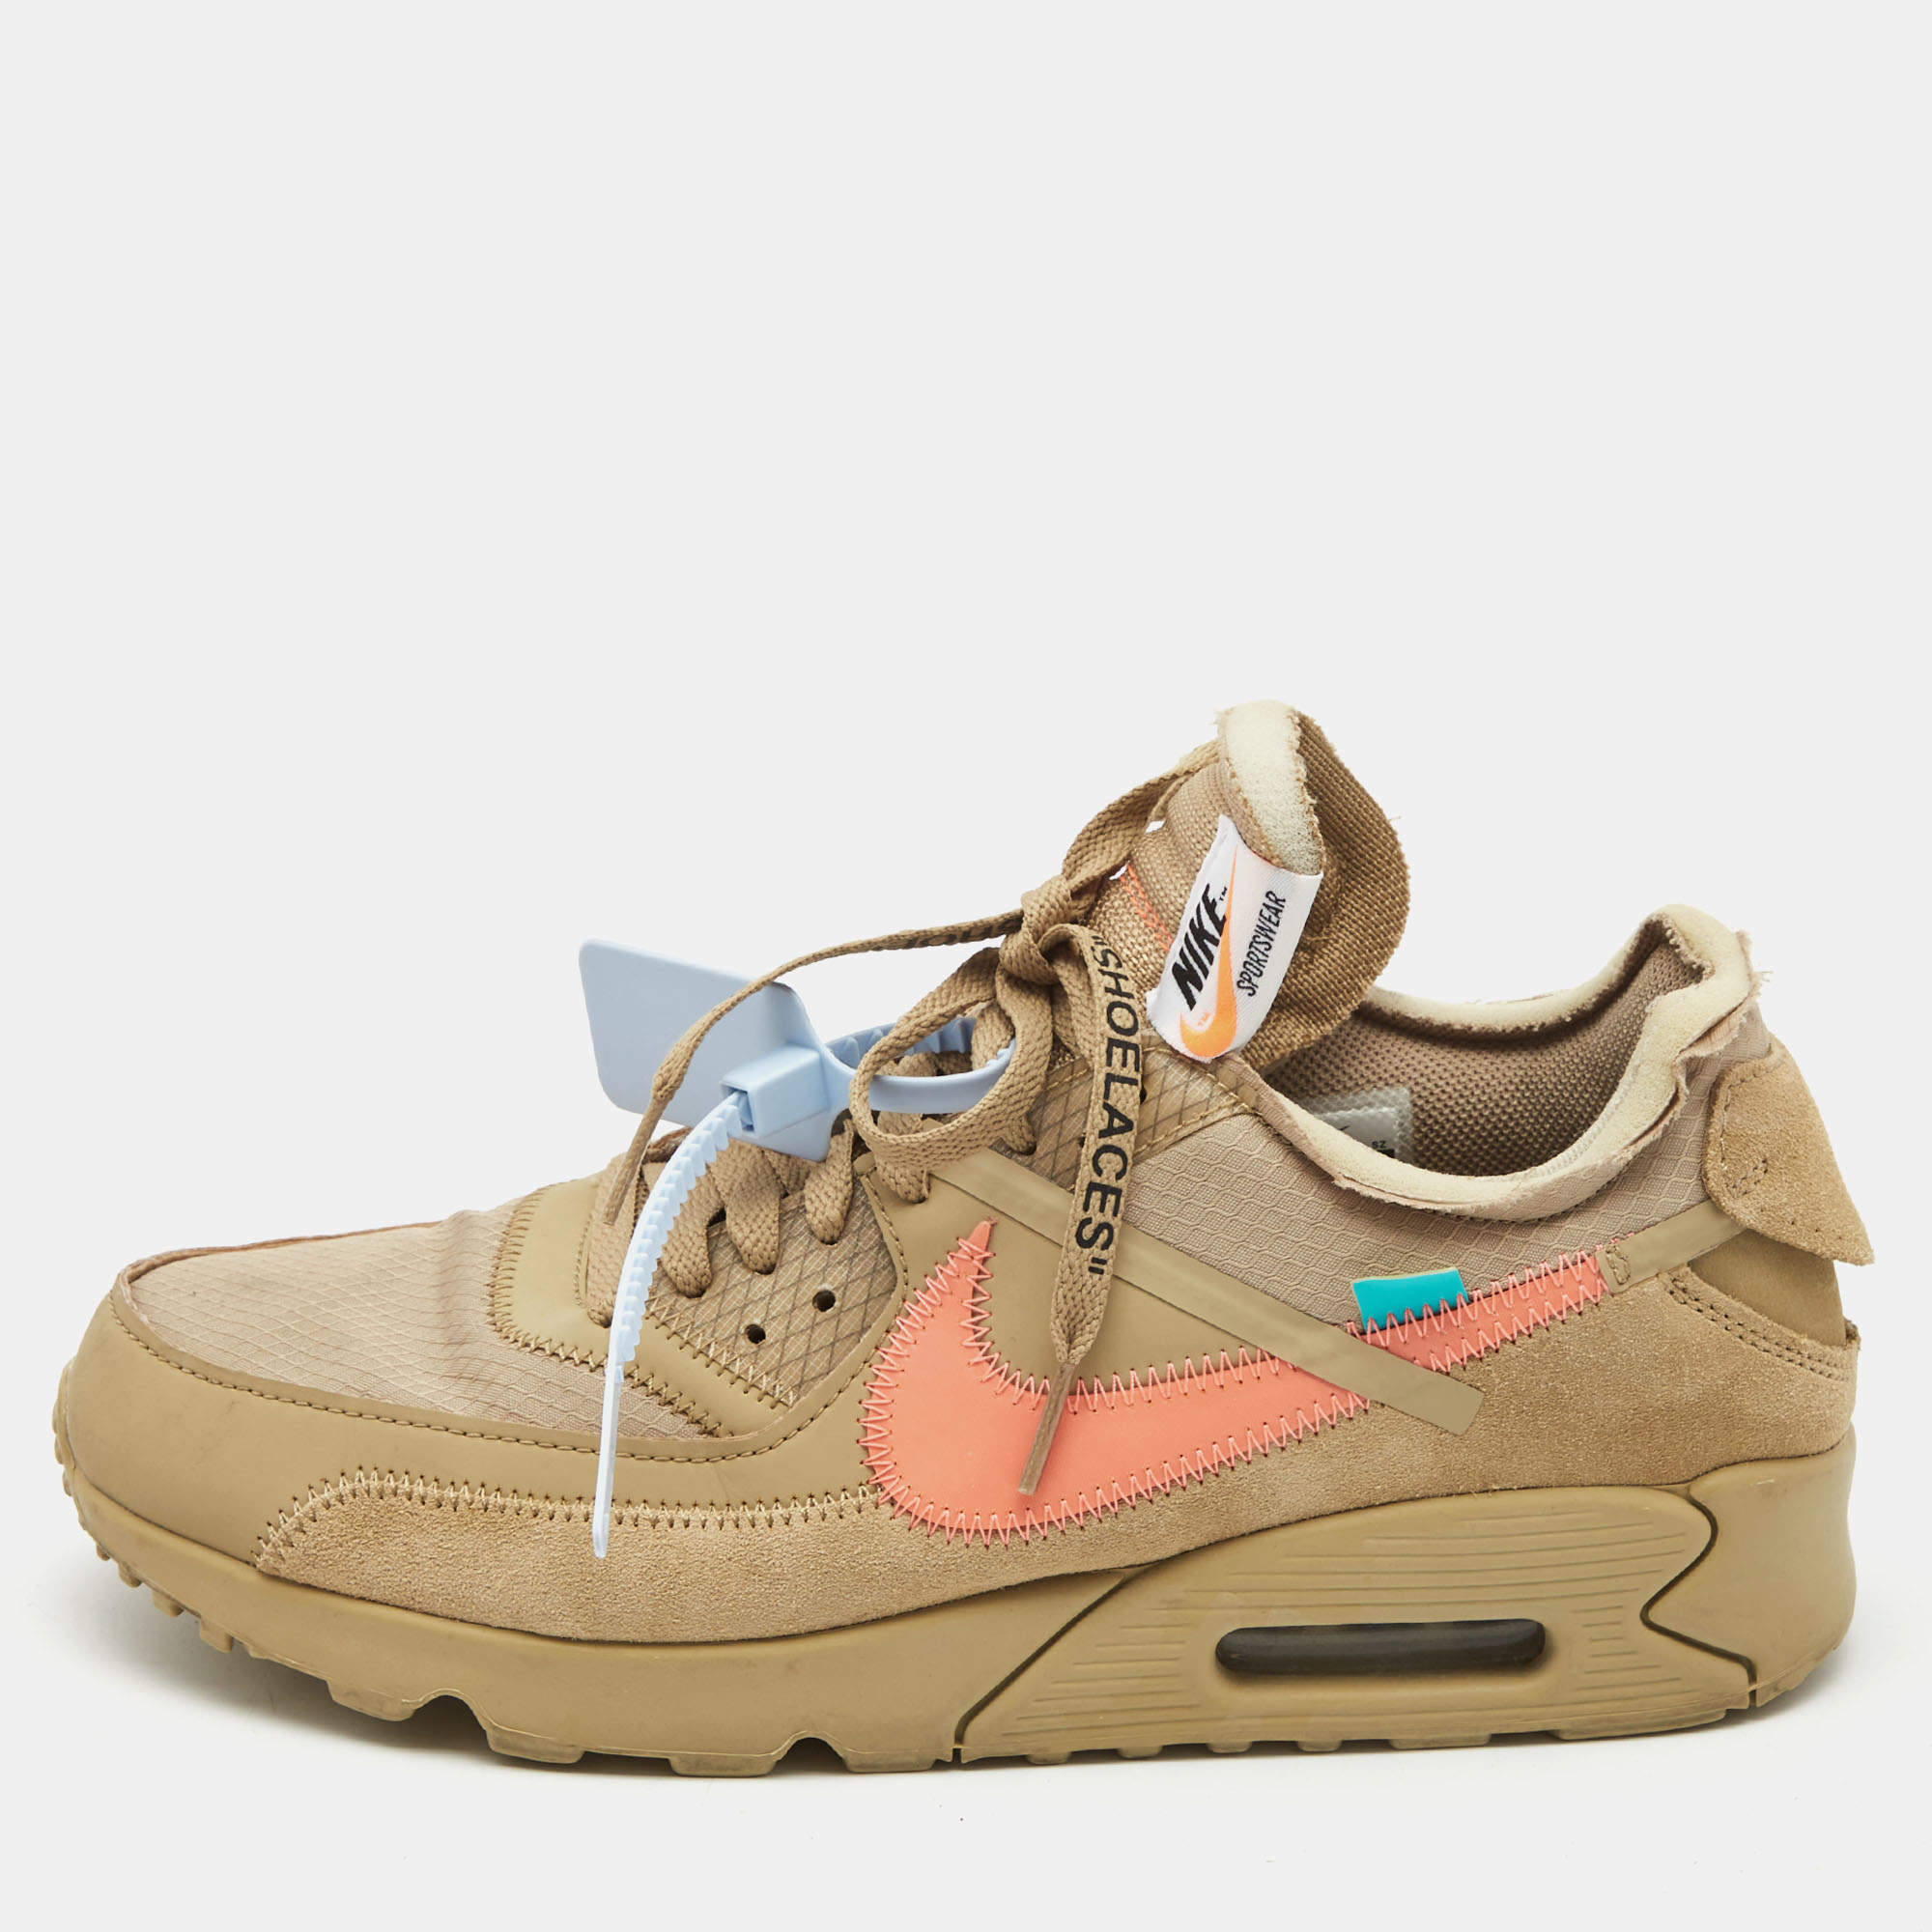 Off-White Nike Beige Fabric and Suede Max Desert Ore Sneakers Size Off-White x Nike | TLC